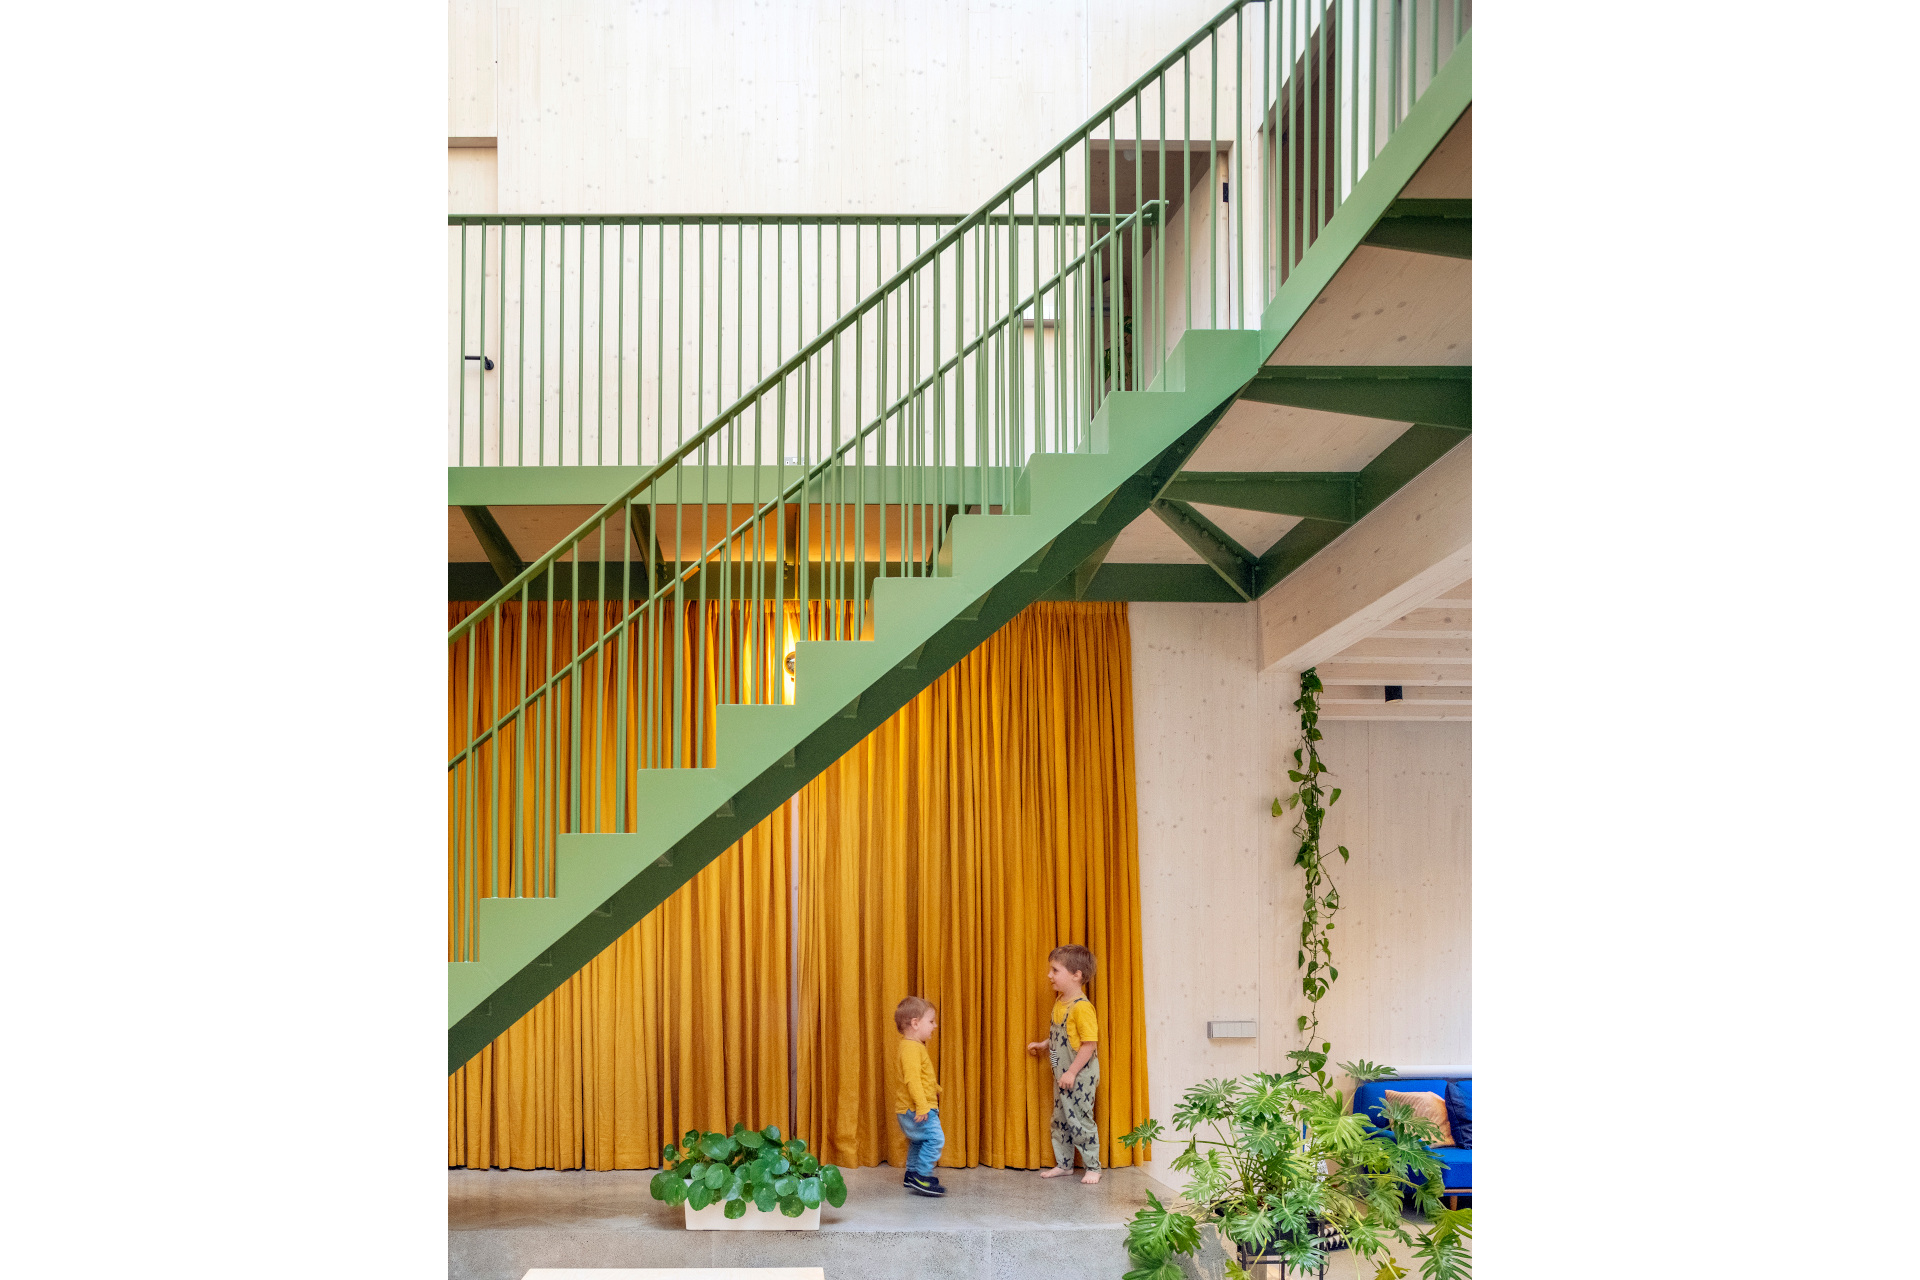 Staircase and curtain with children